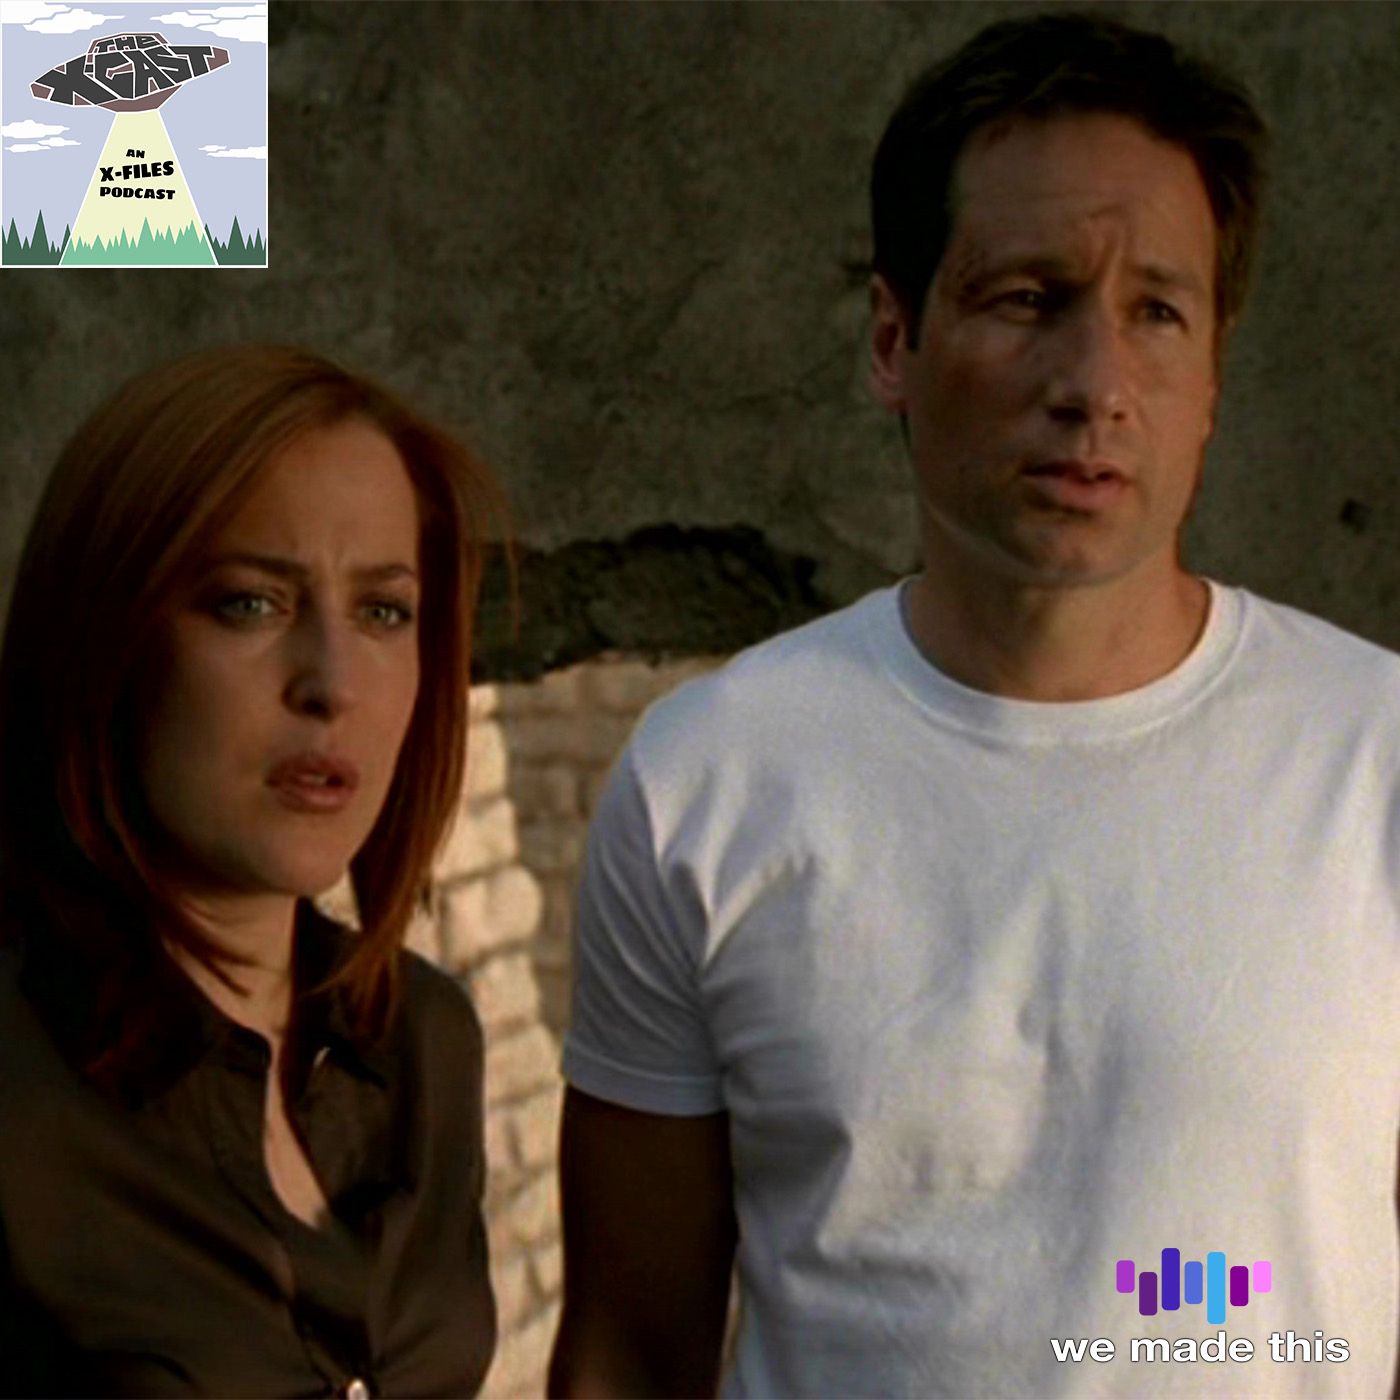 The X-Files 9x19/20: The Truth